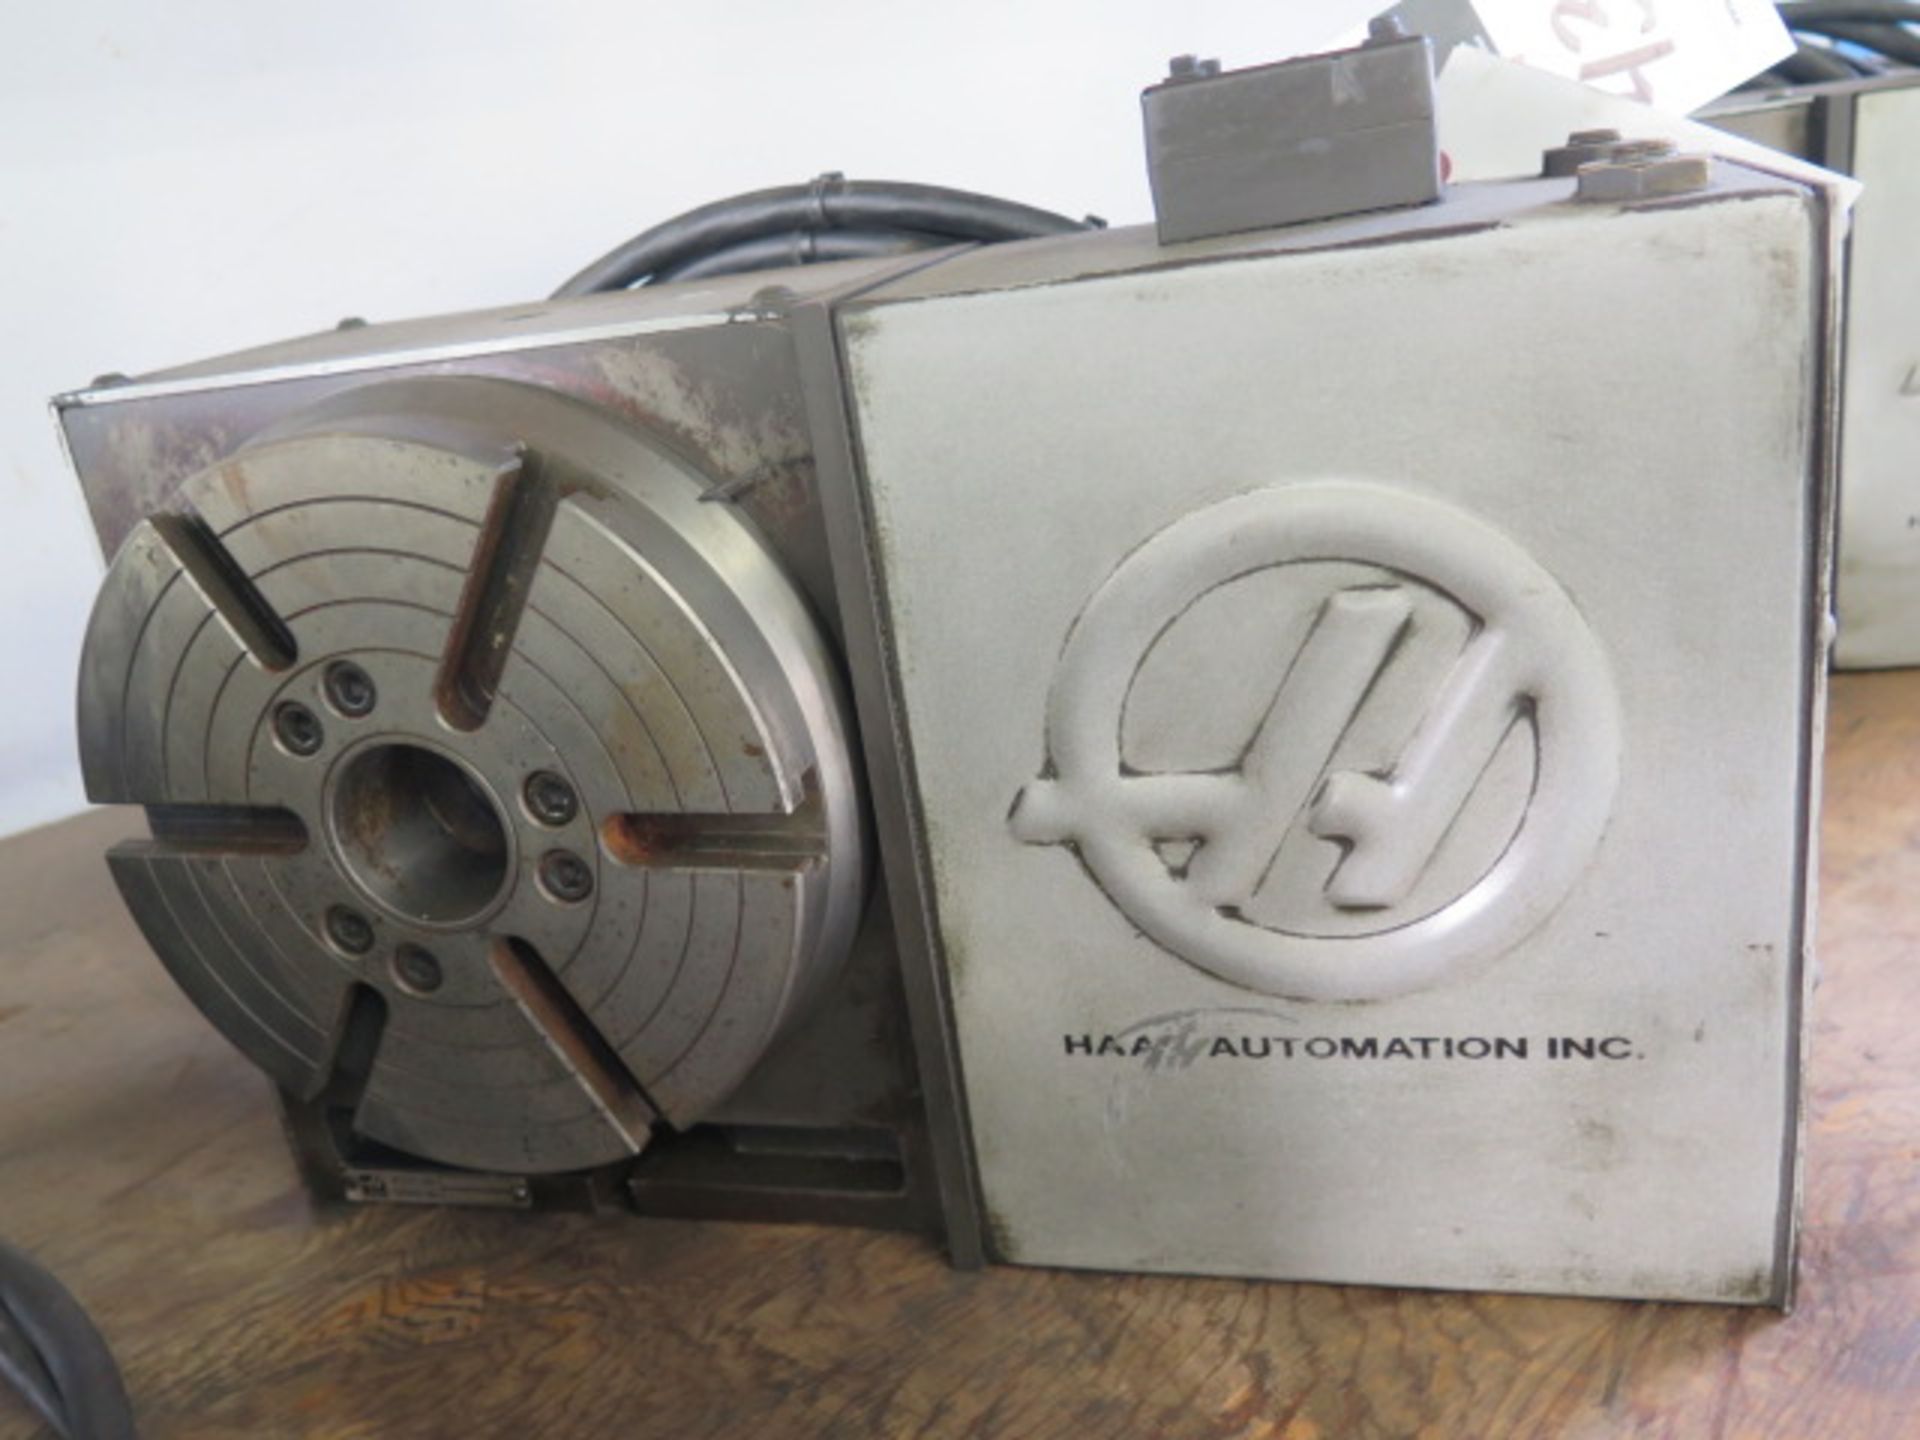 Haas SHRT210H 8” 4th Axis Rotary Indexer s/n 221884